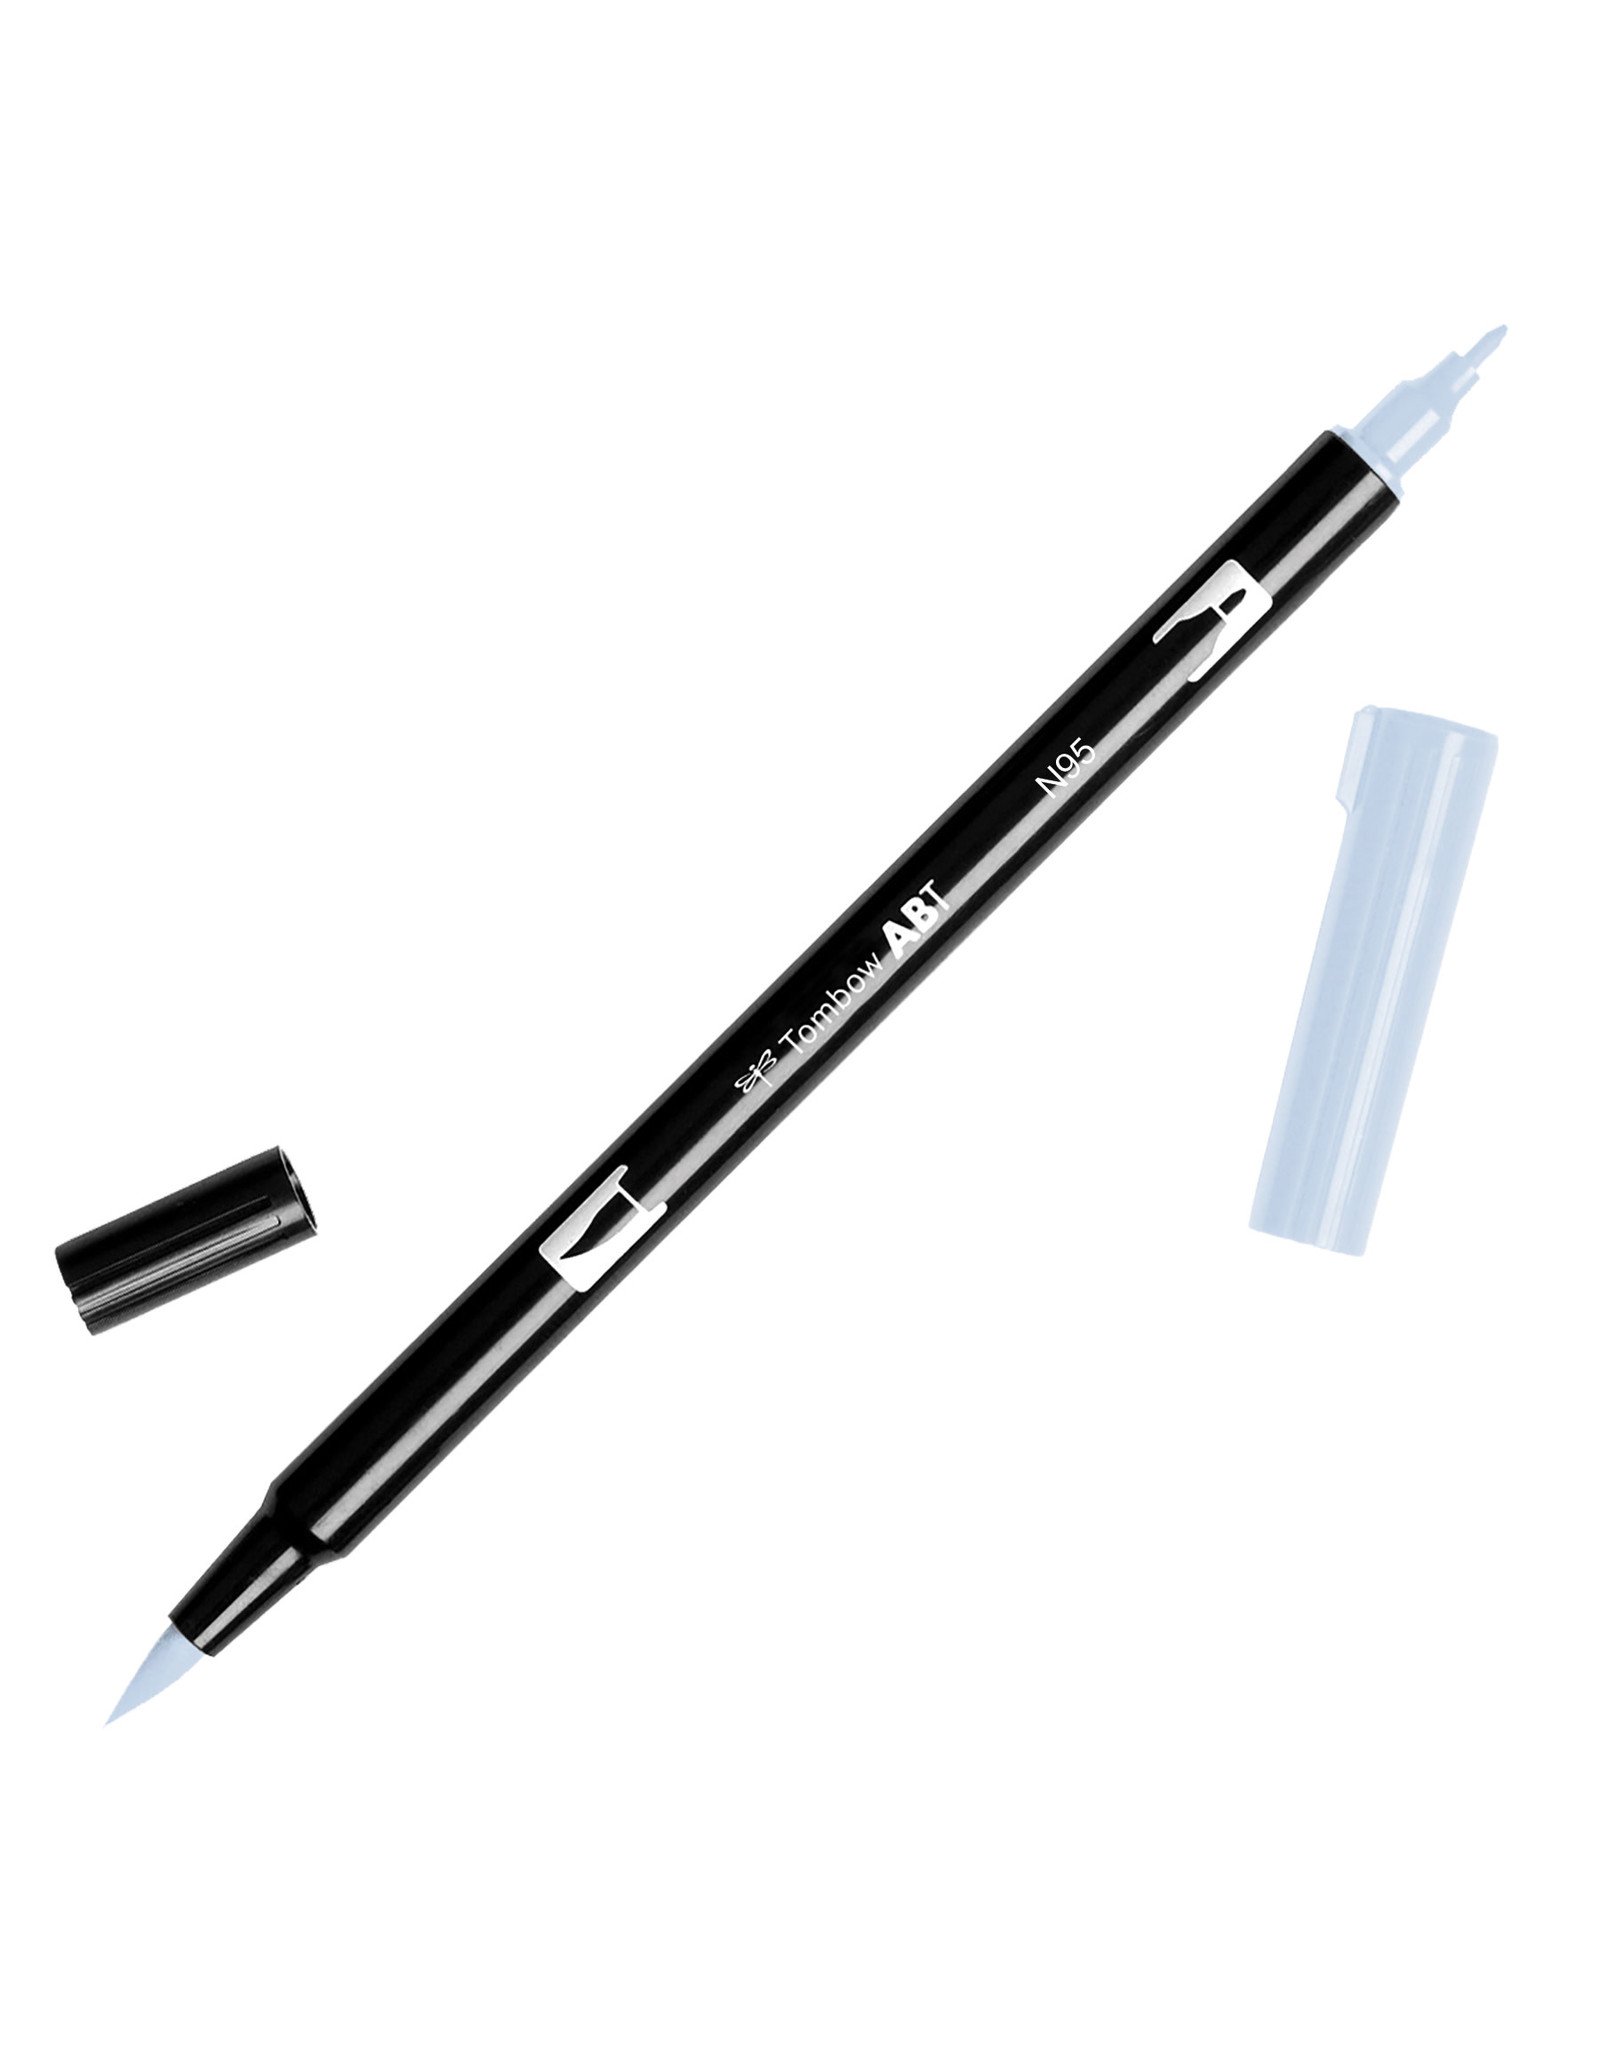 TOMBOW TOMBOW ABT-N95 COOL GRAY #1 DUAL BRUSH MARKER